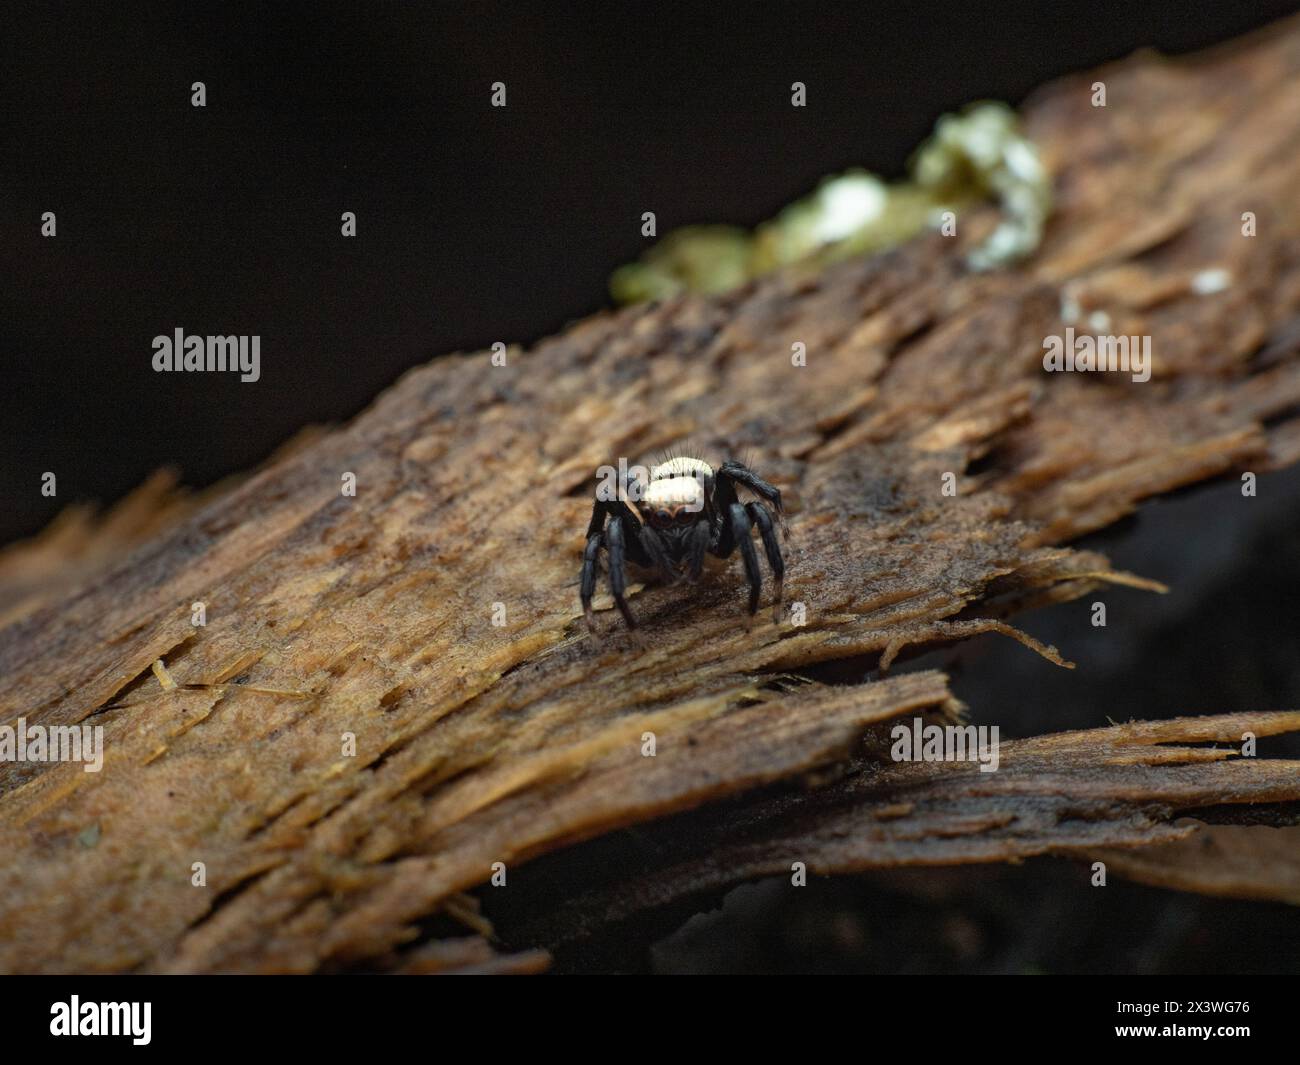 front view of sword-bearing jumping spider thorelliola ensifera on a wet wood Stock Photo